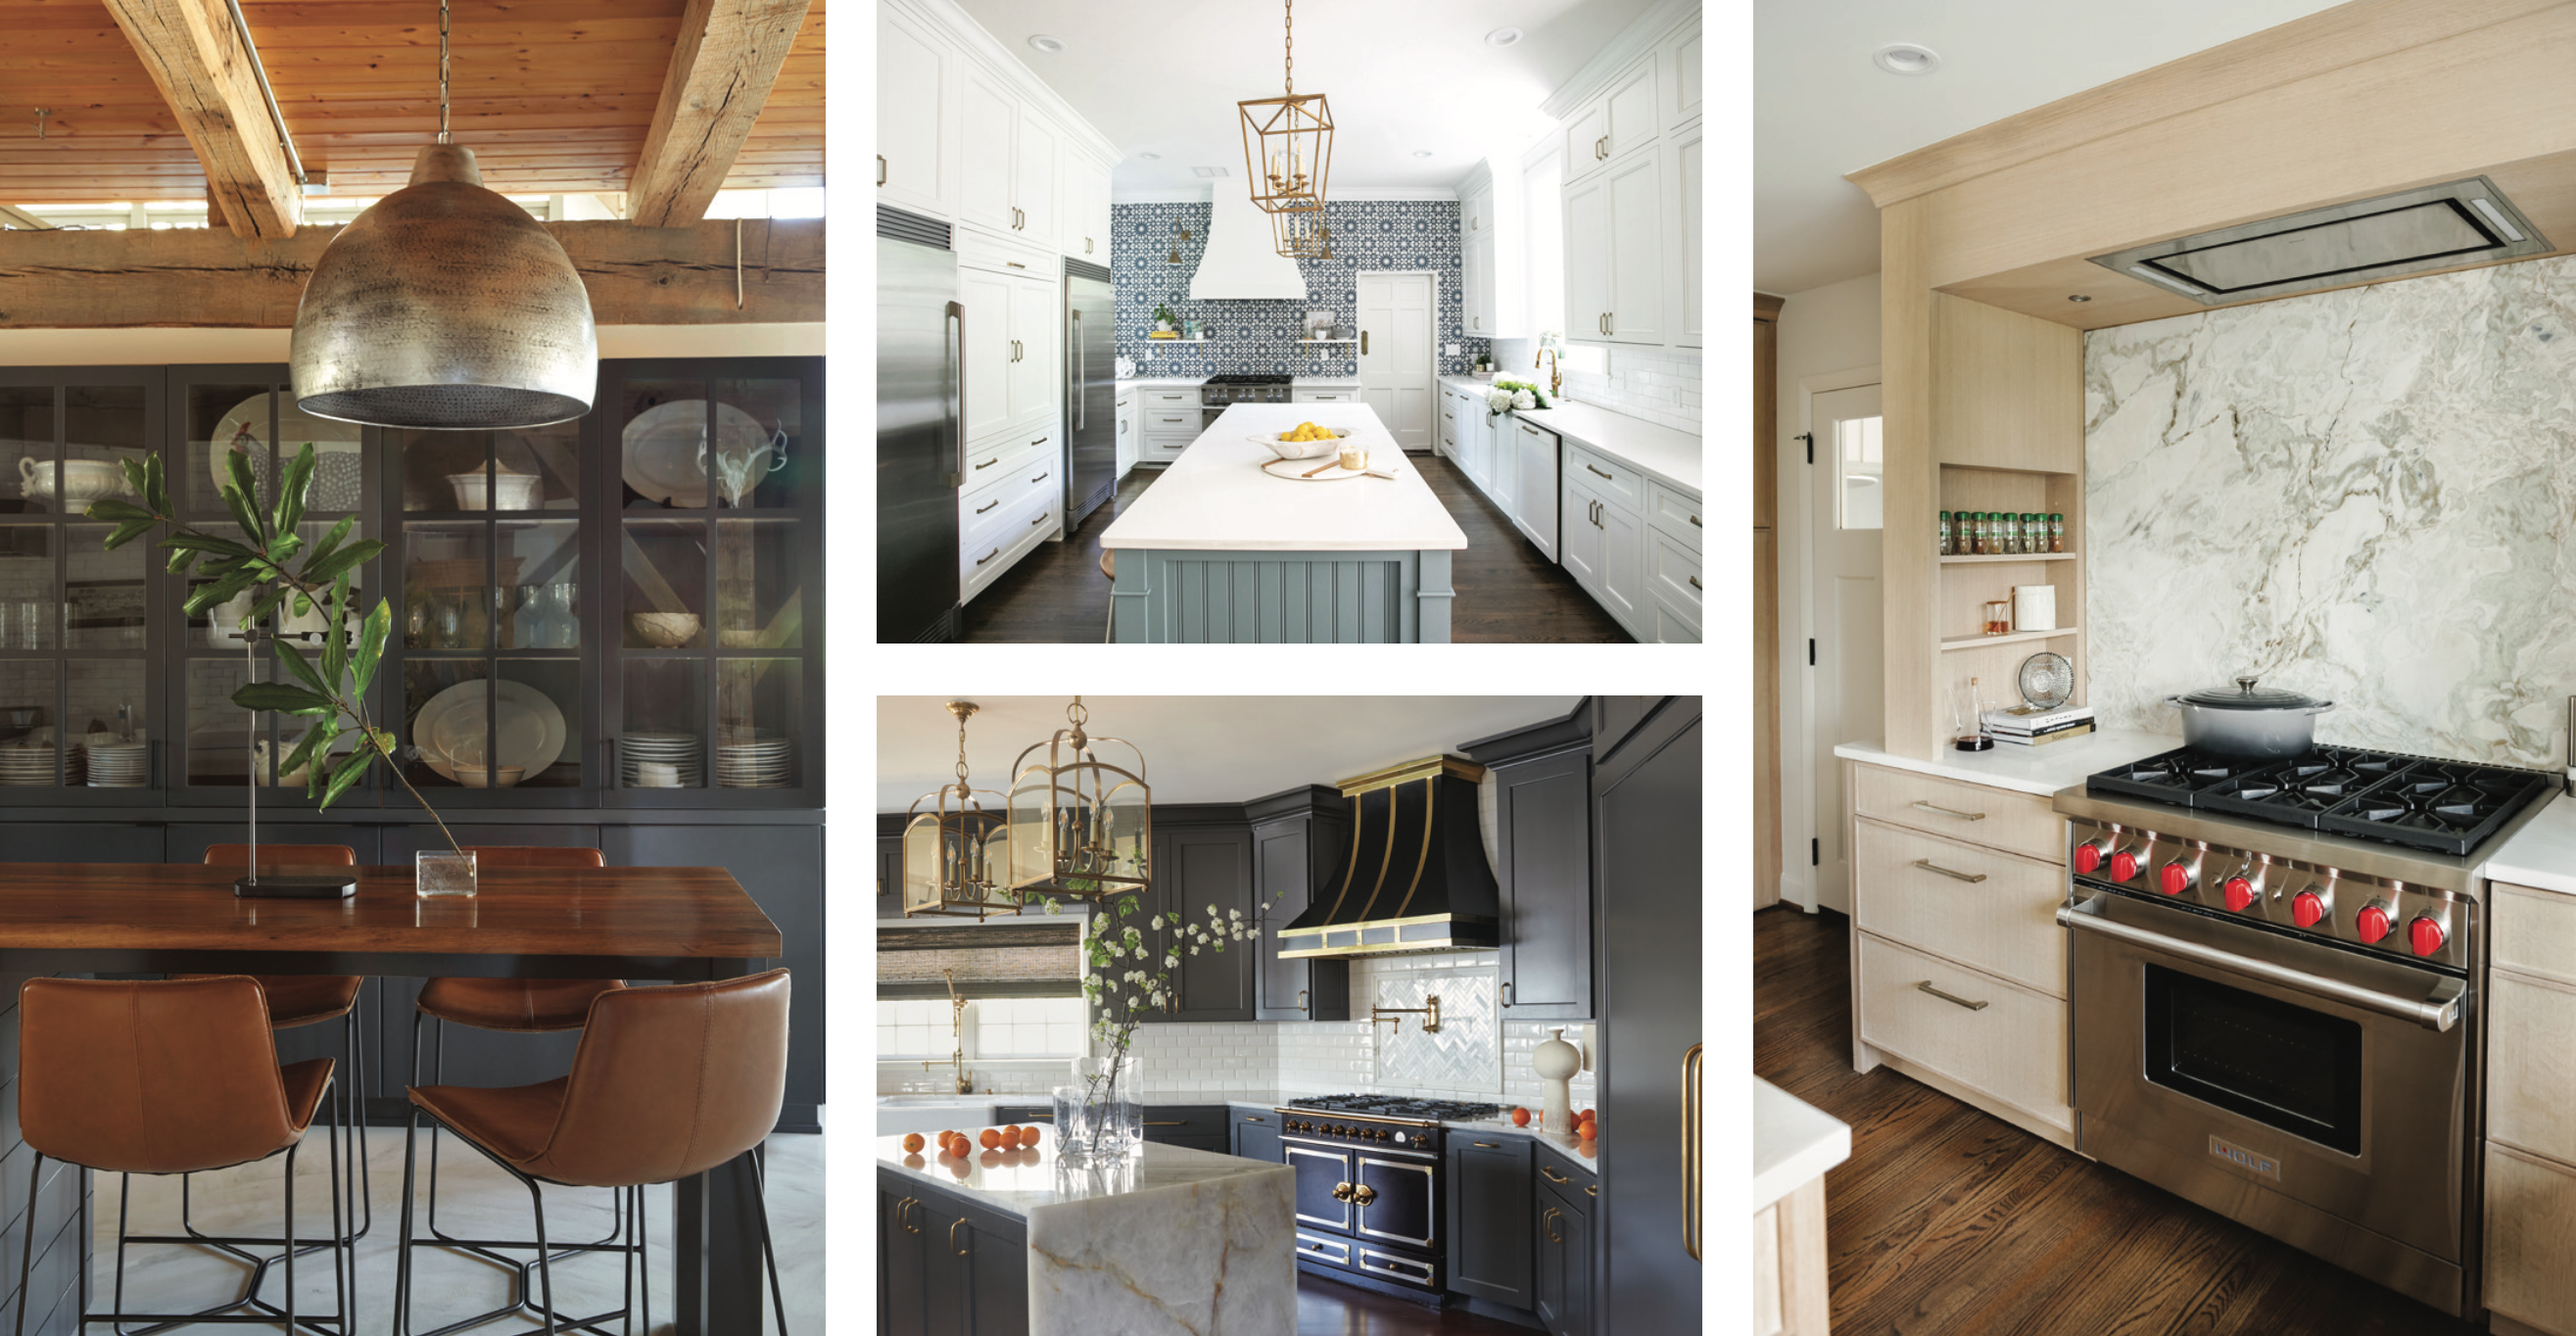 Photos of the 4 winning kitchens